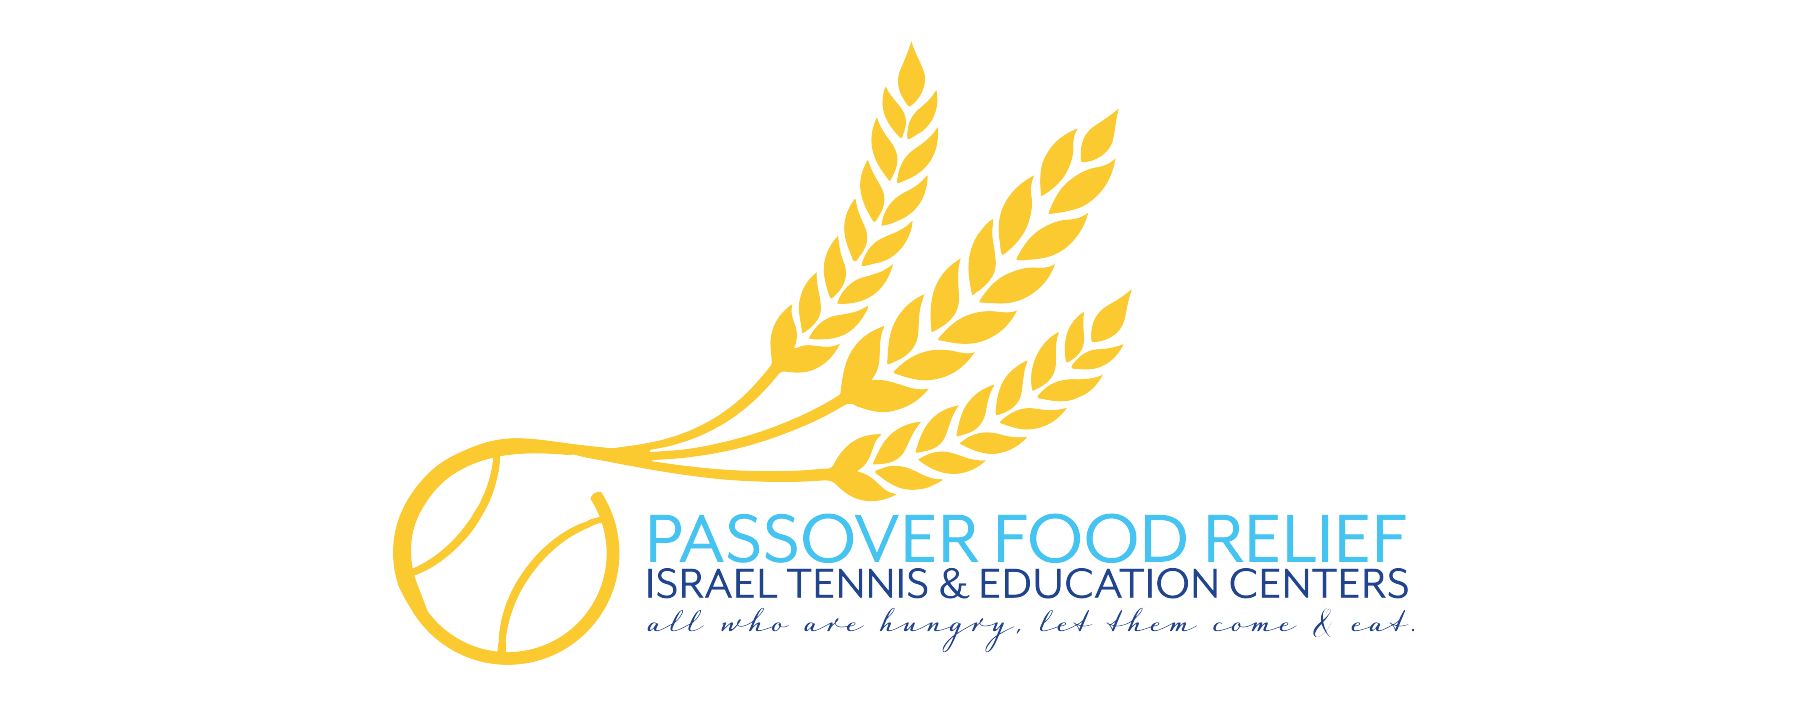 Israel Tennis & Education Centers Passover Food Relief logo